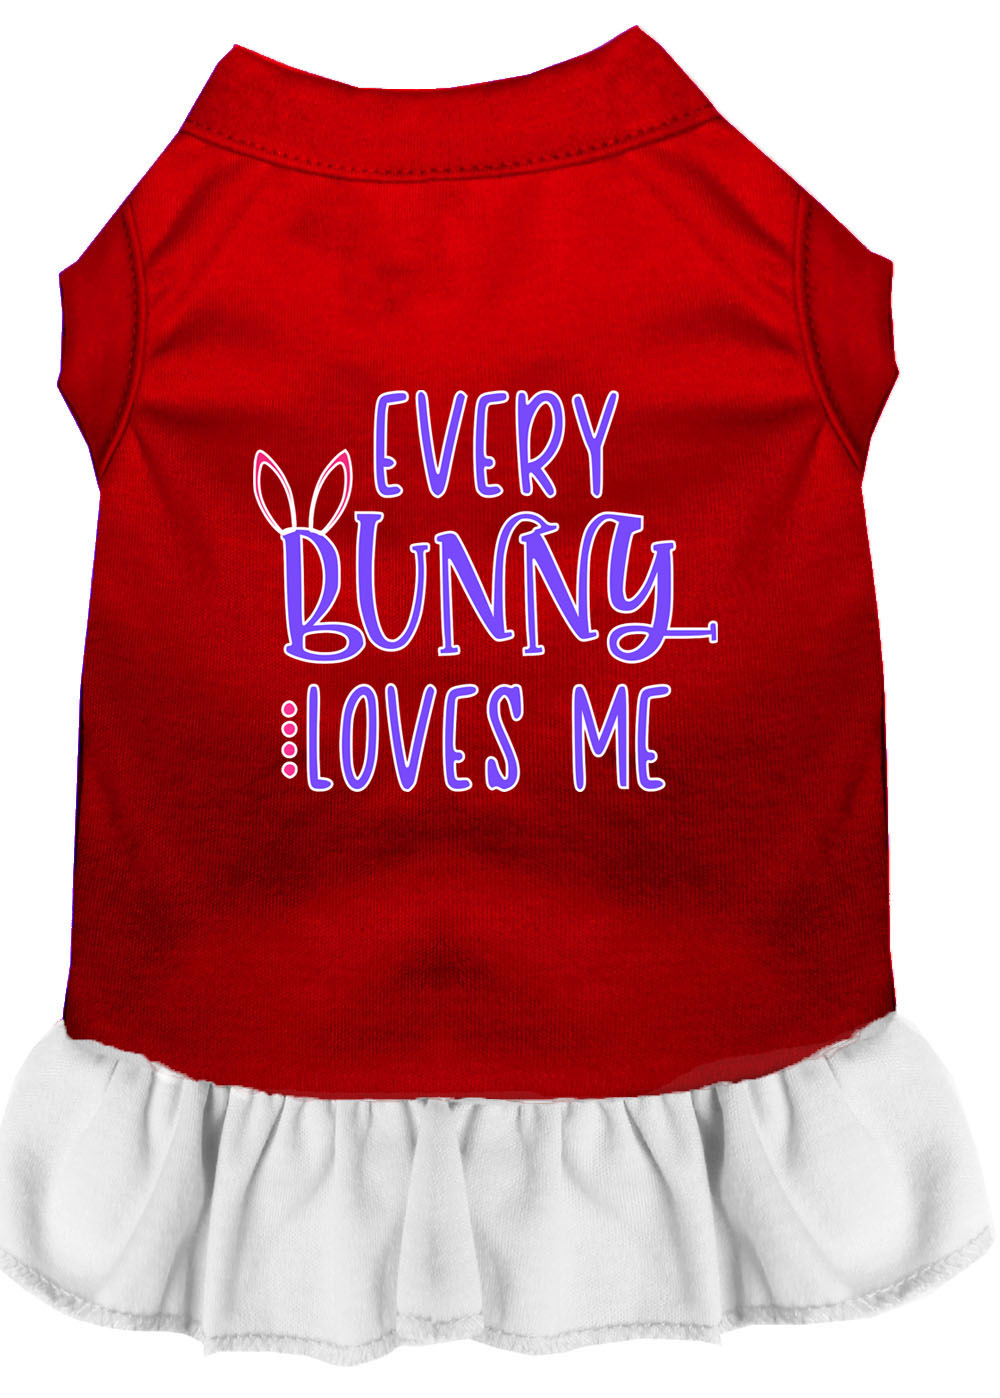 Every Bunny Loves me Screen Print Dog Dress Red with White Med